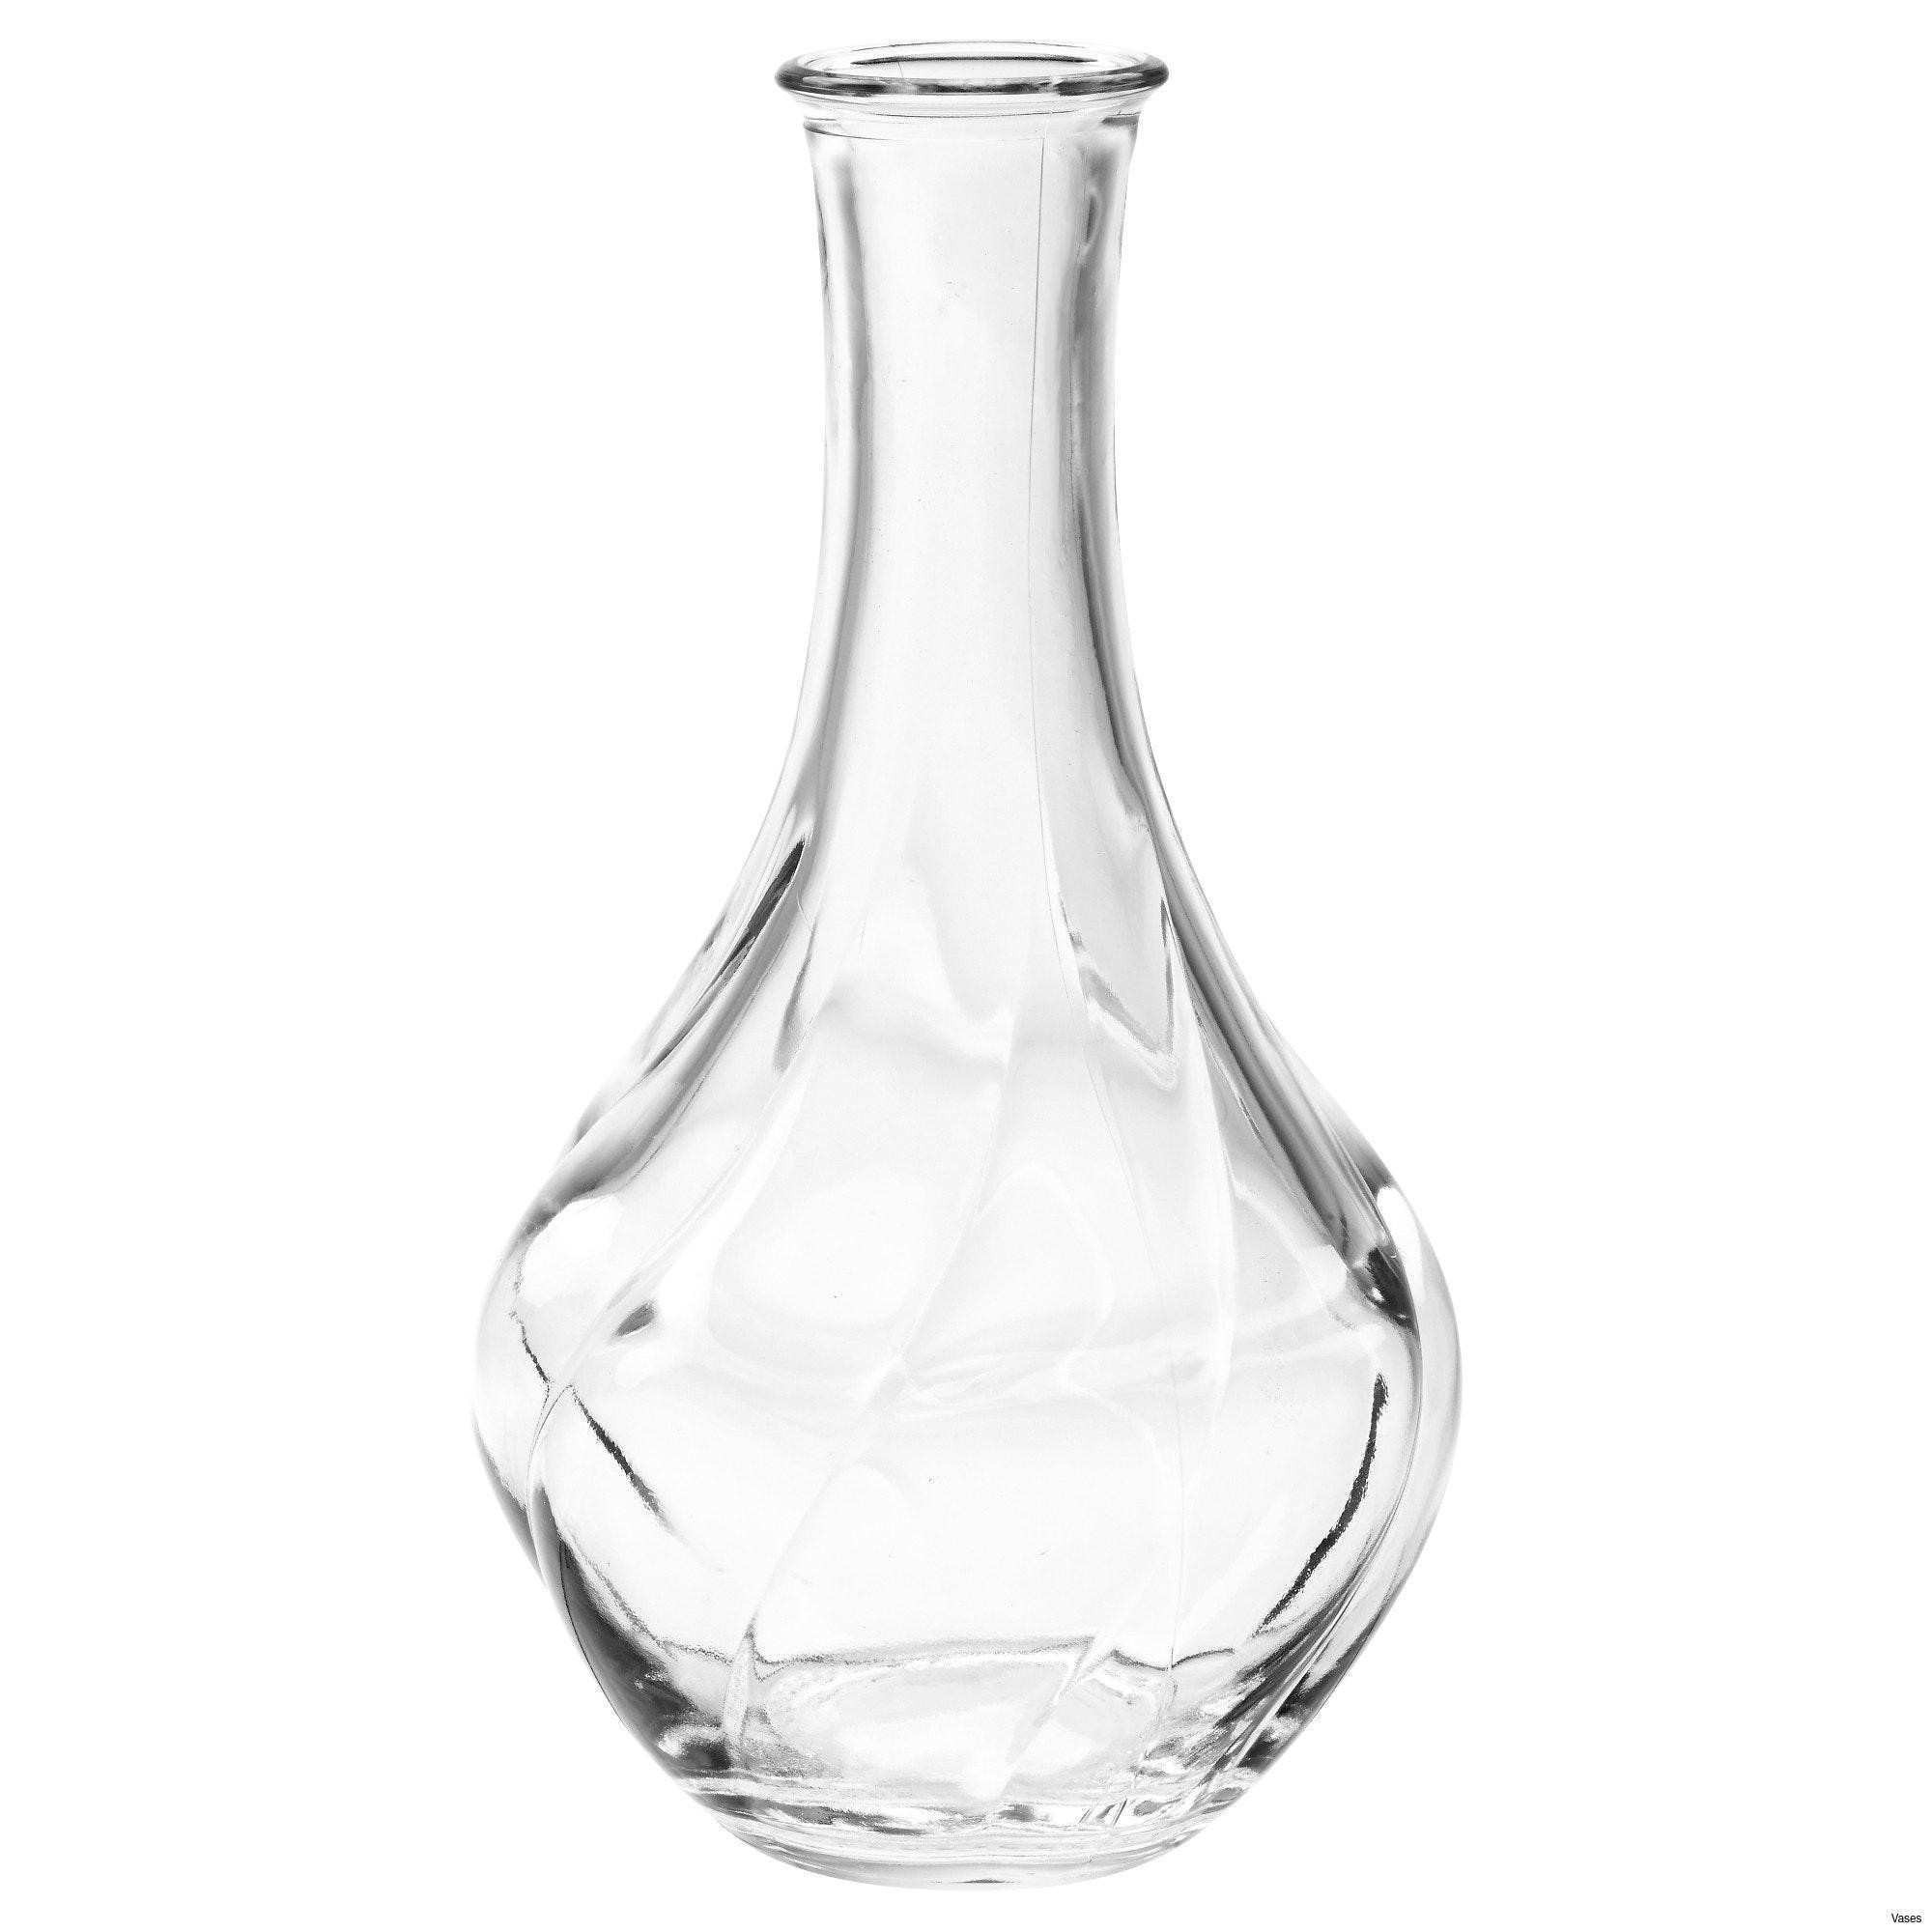 30 Fabulous Rosenthal White Vase 2022 free download rosenthal white vase of small glass vase photos vases floating candle vase set glass in small glass vase pics small outdoor lights best living room glass vases fresh clear of small